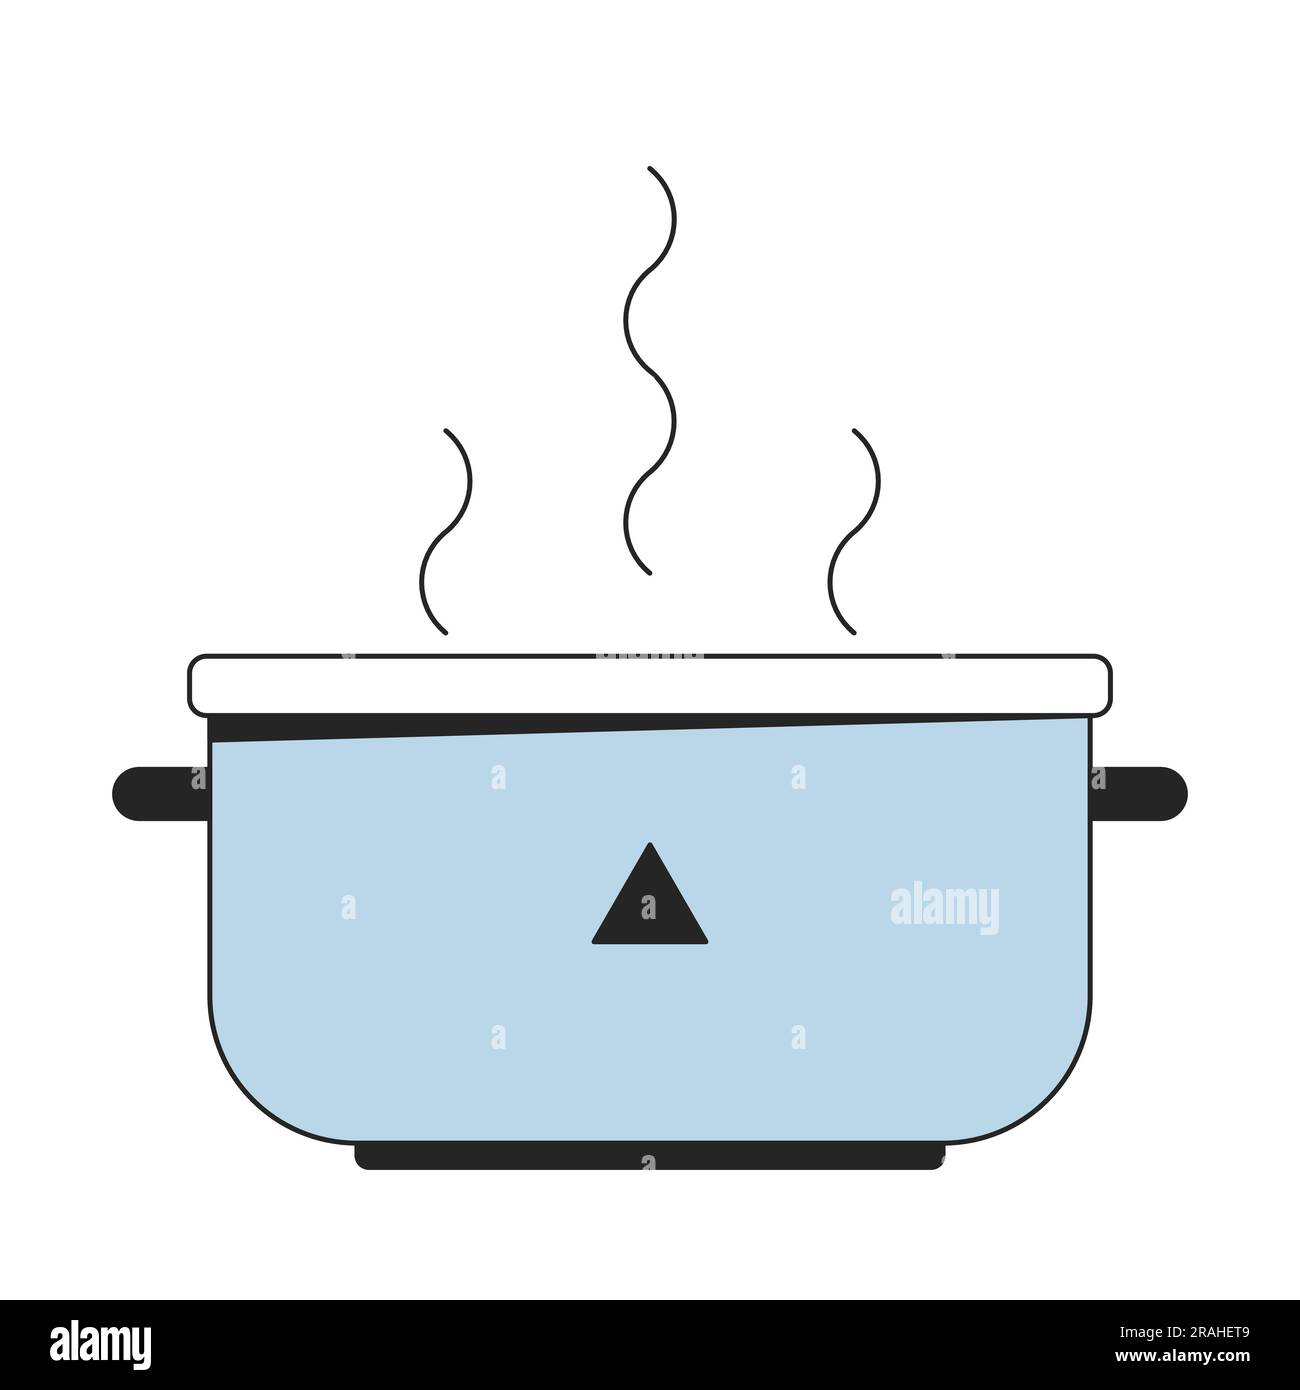 https://c8.alamy.com/comp/2RAHET9/steel-pot-with-boiling-water-flat-line-color-isolated-vector-object-2RAHET9.jpg